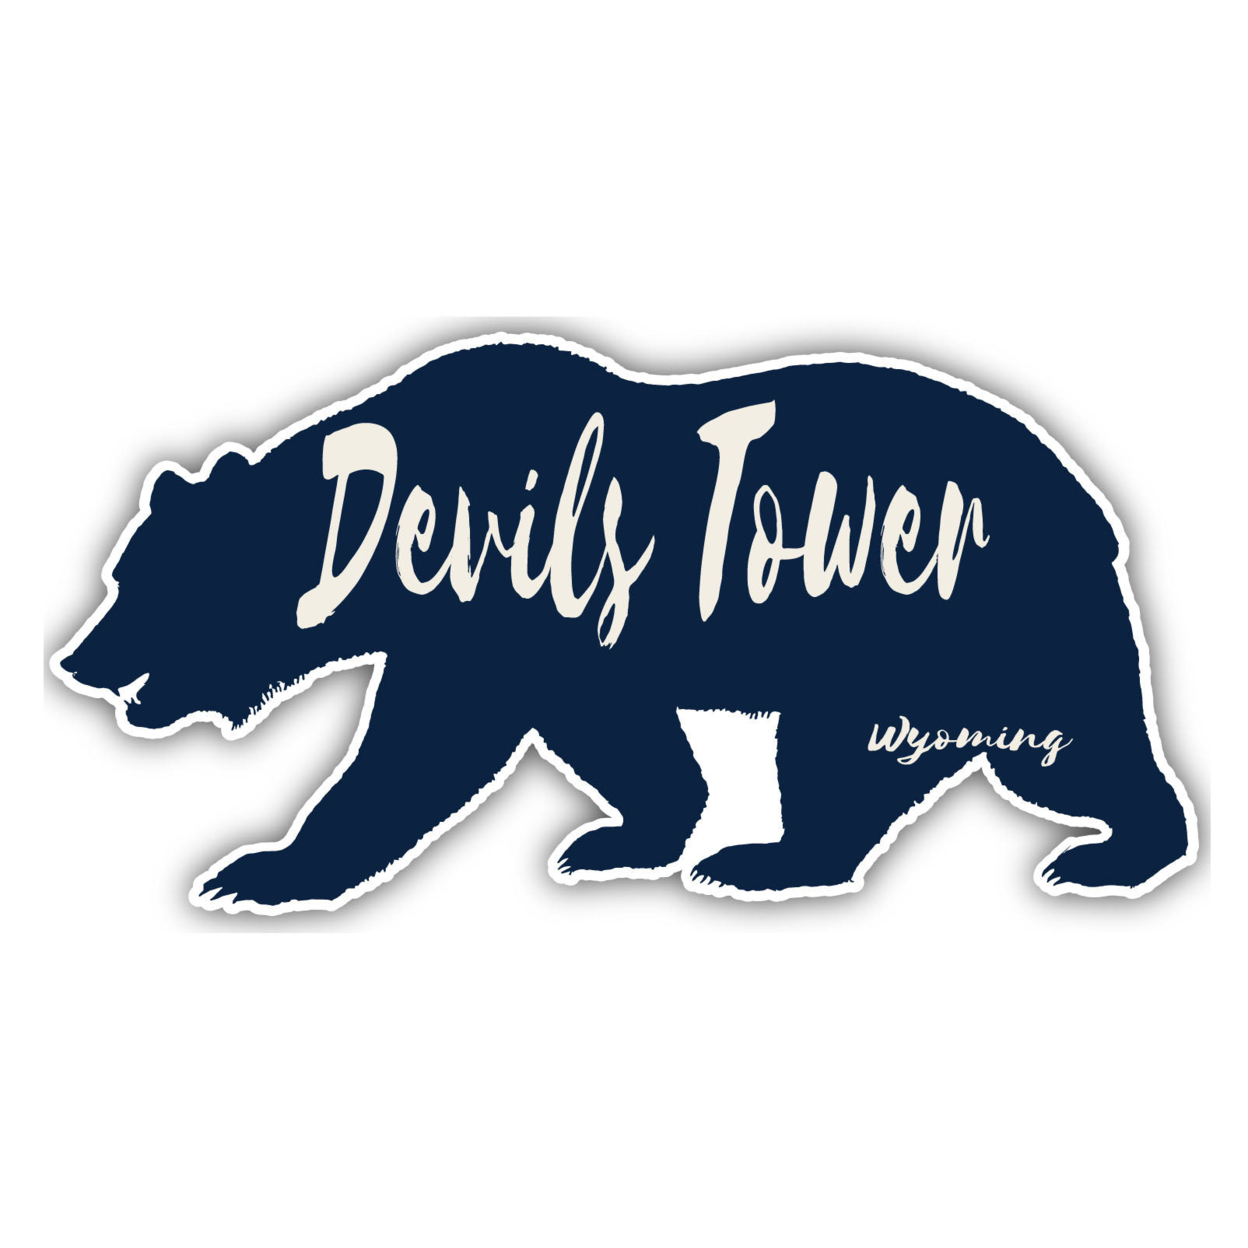 Devils Tower Wyoming Souvenir Decorative Stickers (Choose Theme And Size) - Single Unit, 6-Inch, Tent